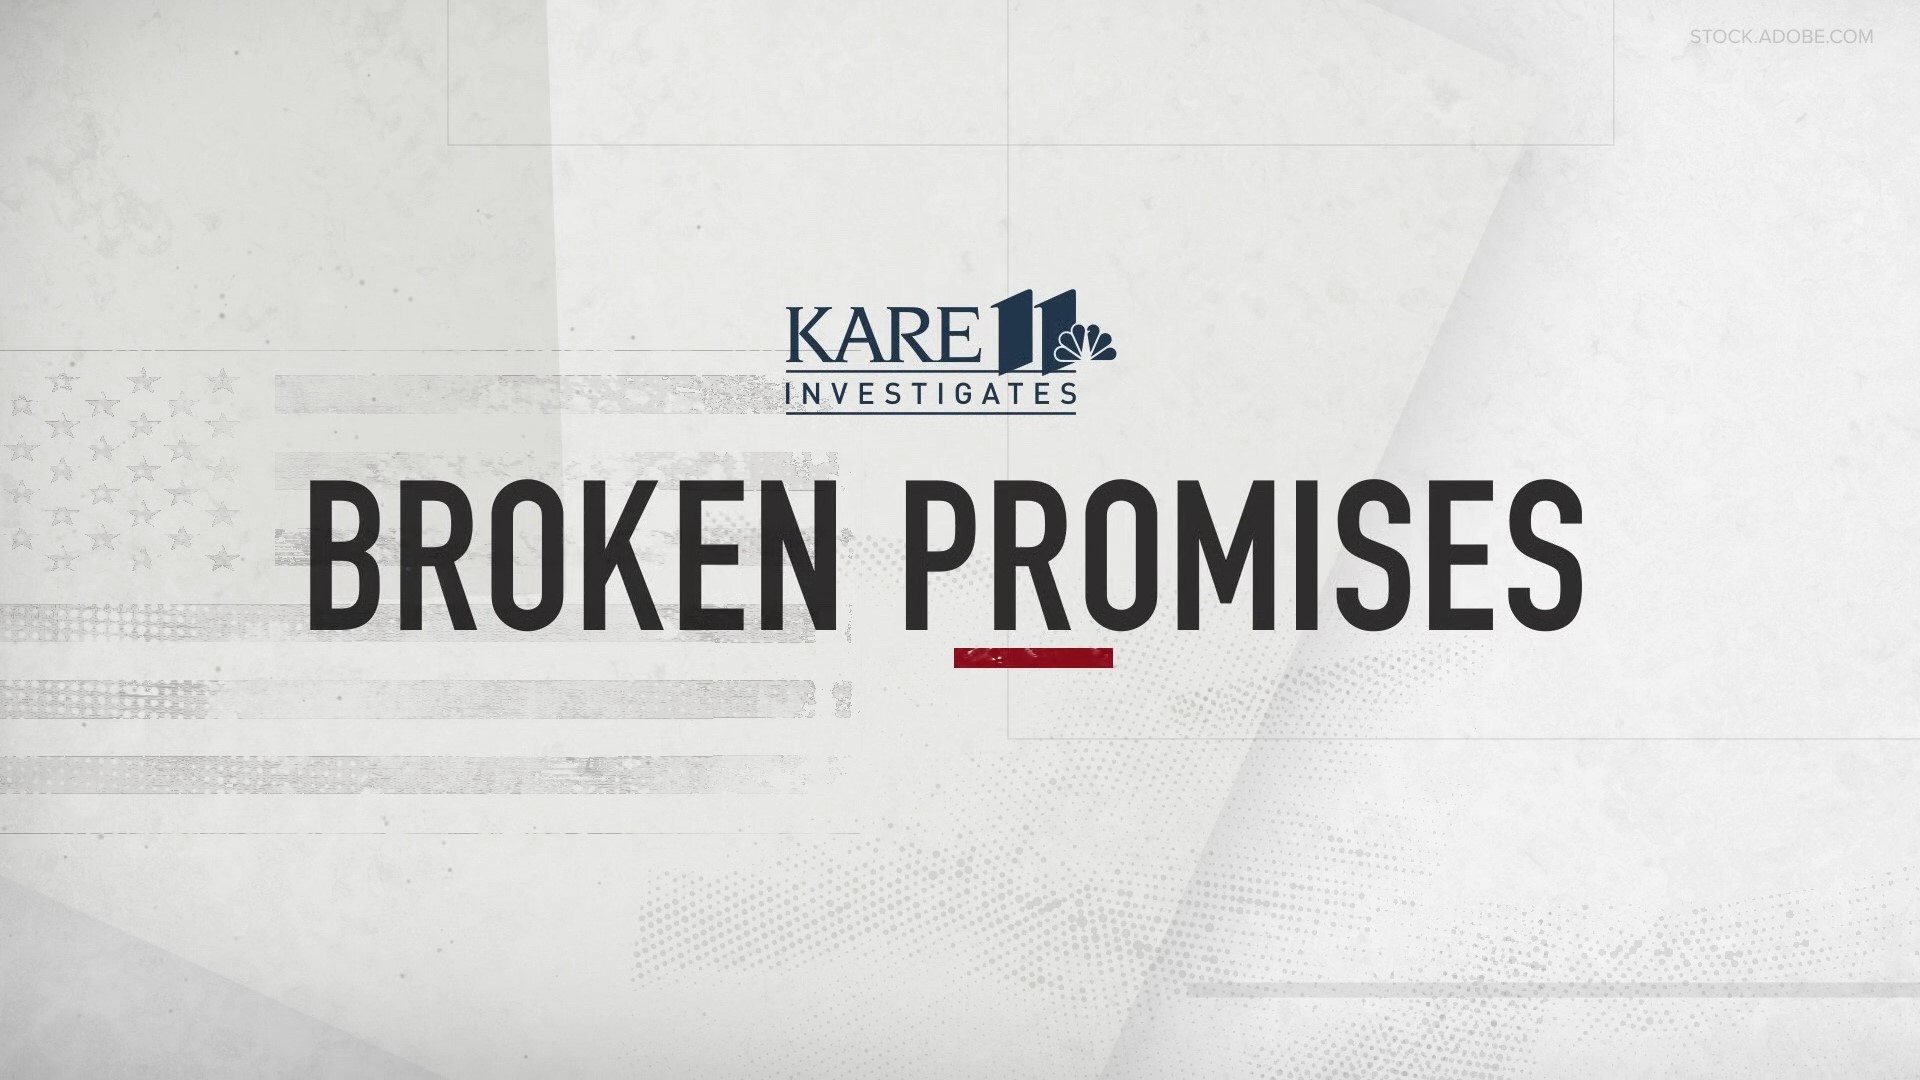 This KARE 11 investigation exposes Veterans being misdiagnosed, and denied medical care and disability benefits.